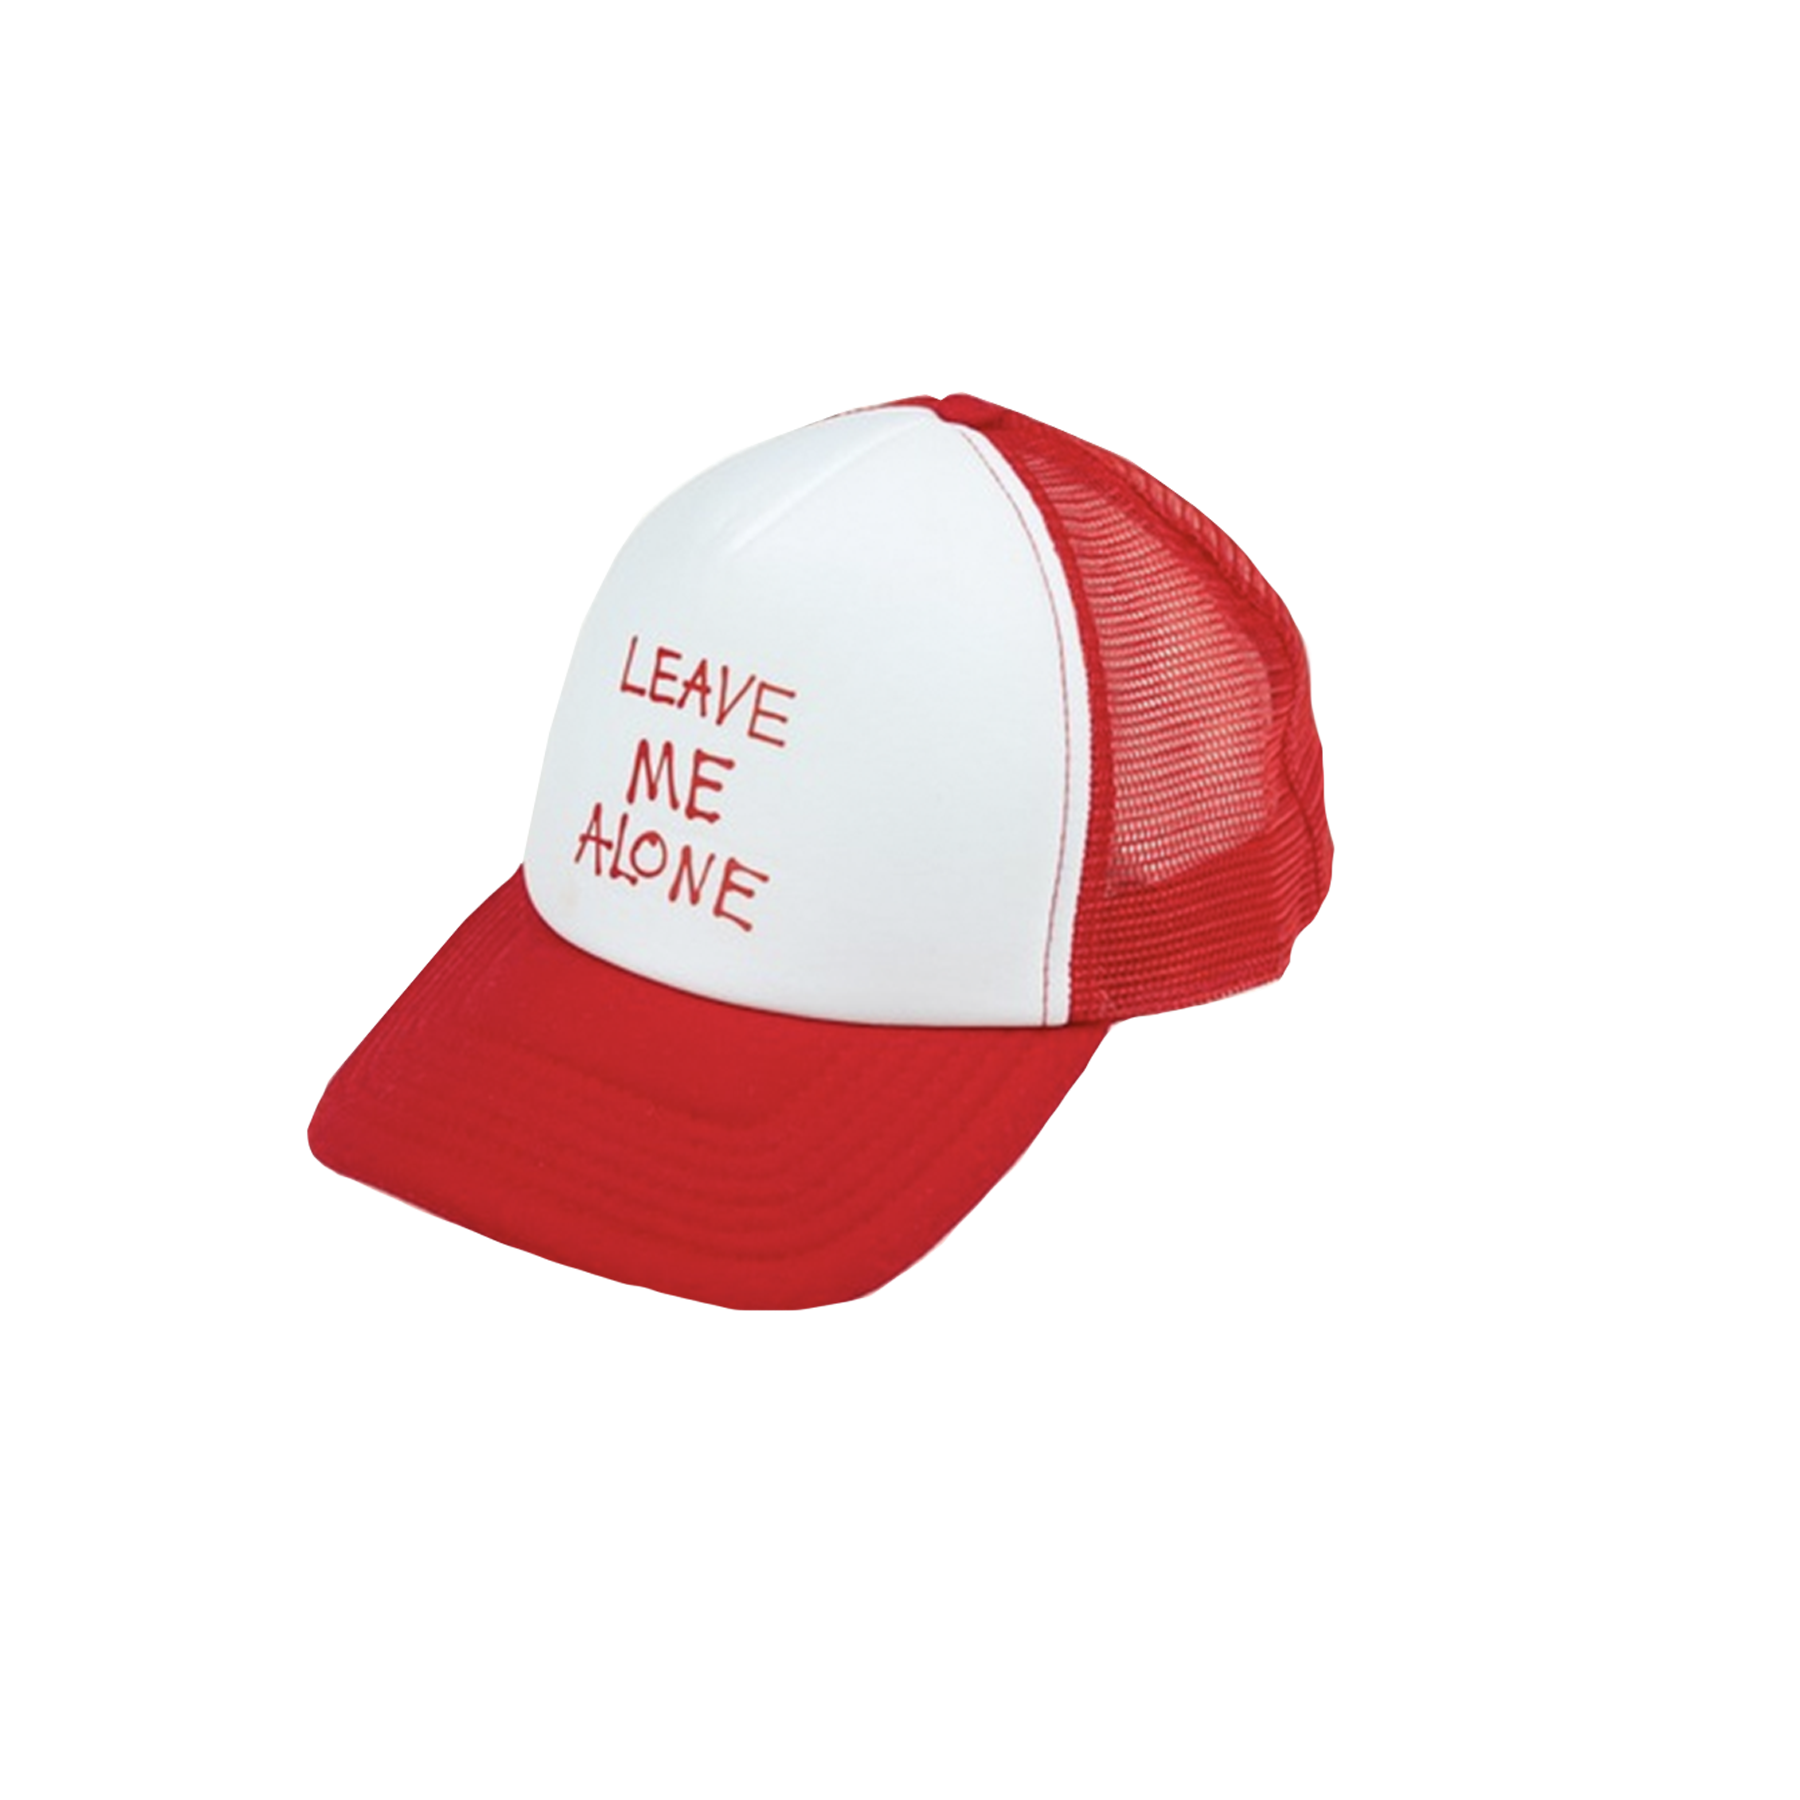 Caity Baser - Leave Me Alone Red Trucker Cap